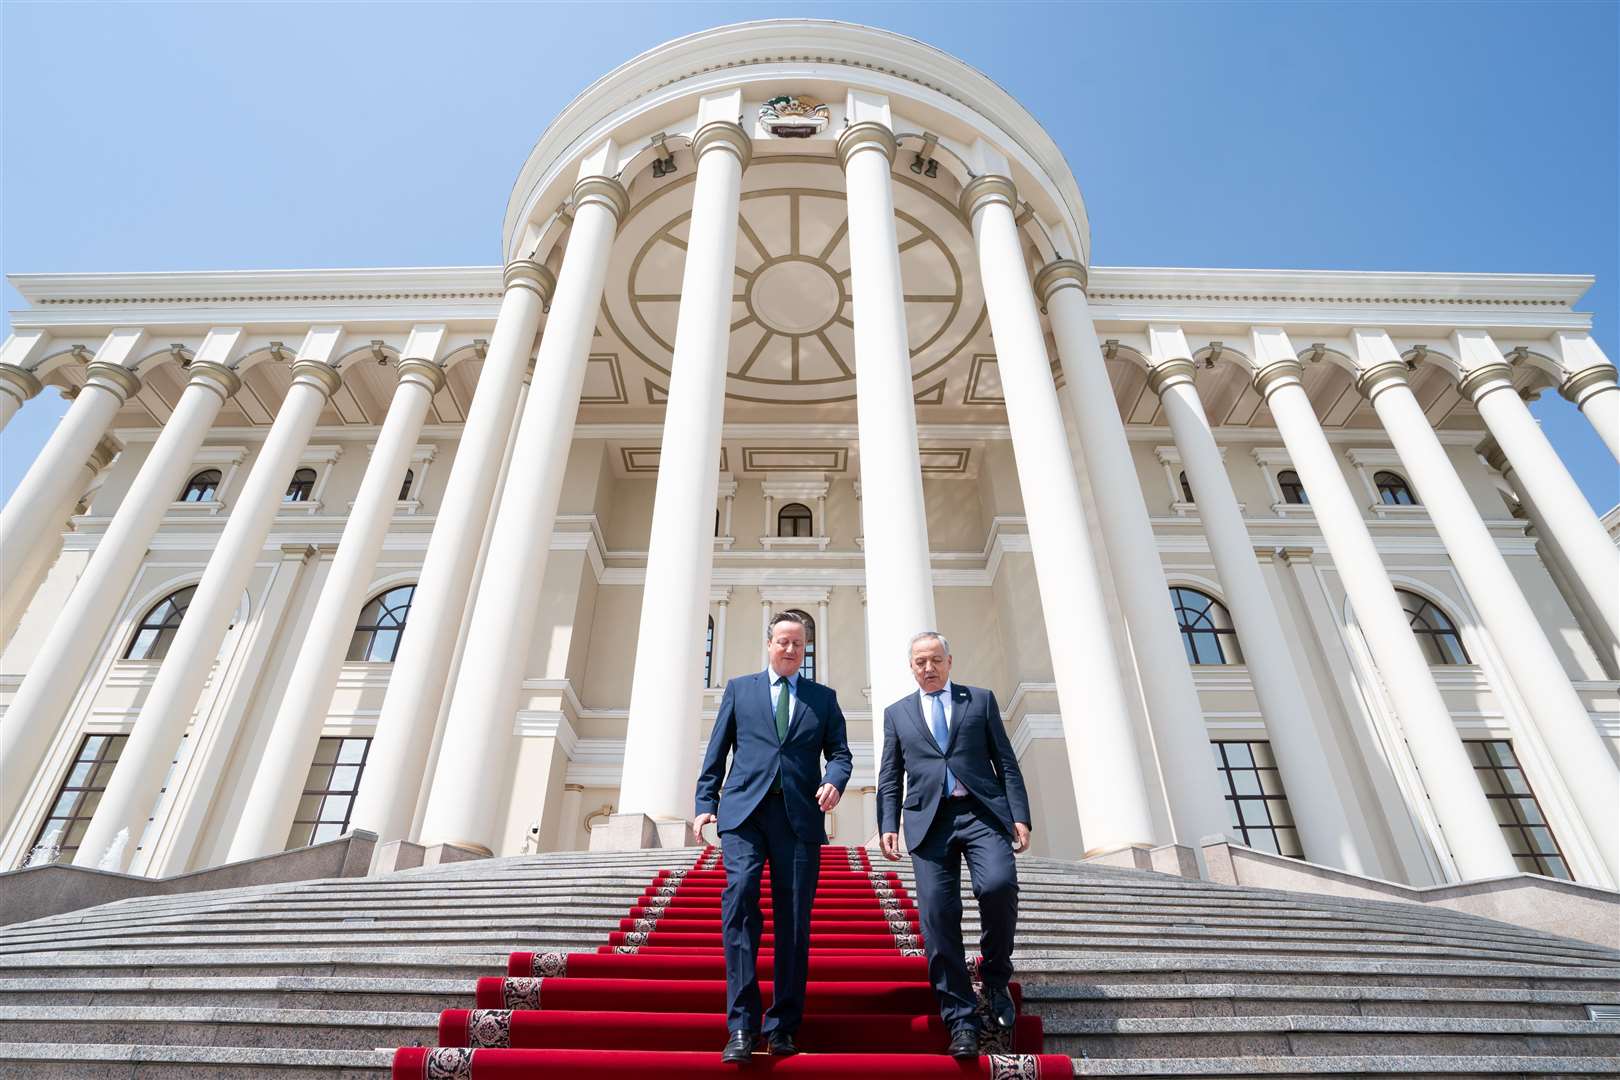 Lord Cameron leaves the Presidential Palace in Dushanbe with Tajik foreign minister Sirojiddin Muhriddin after meeting the president as he visits Tajikistan (Stefan Rousseau/PA)